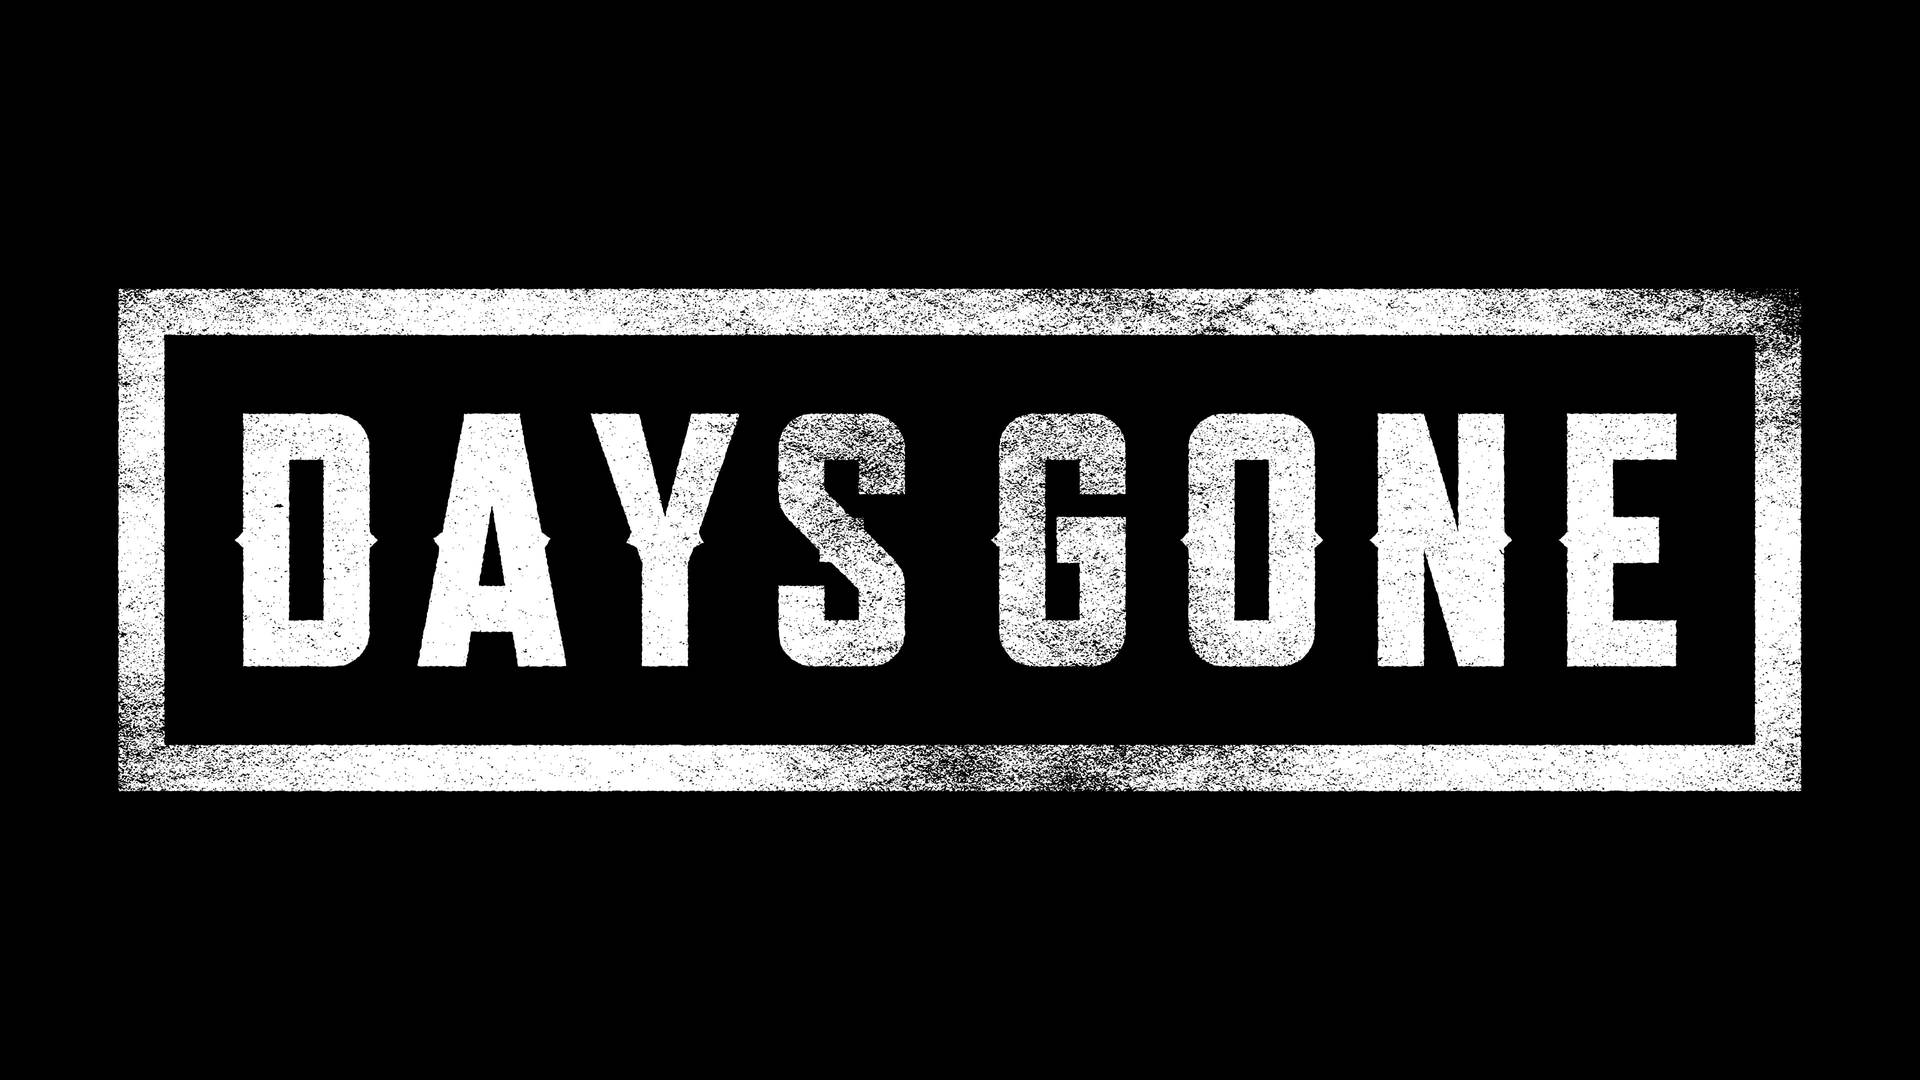 Live Fast and Die Free in Days Gone Logo Wallpaper